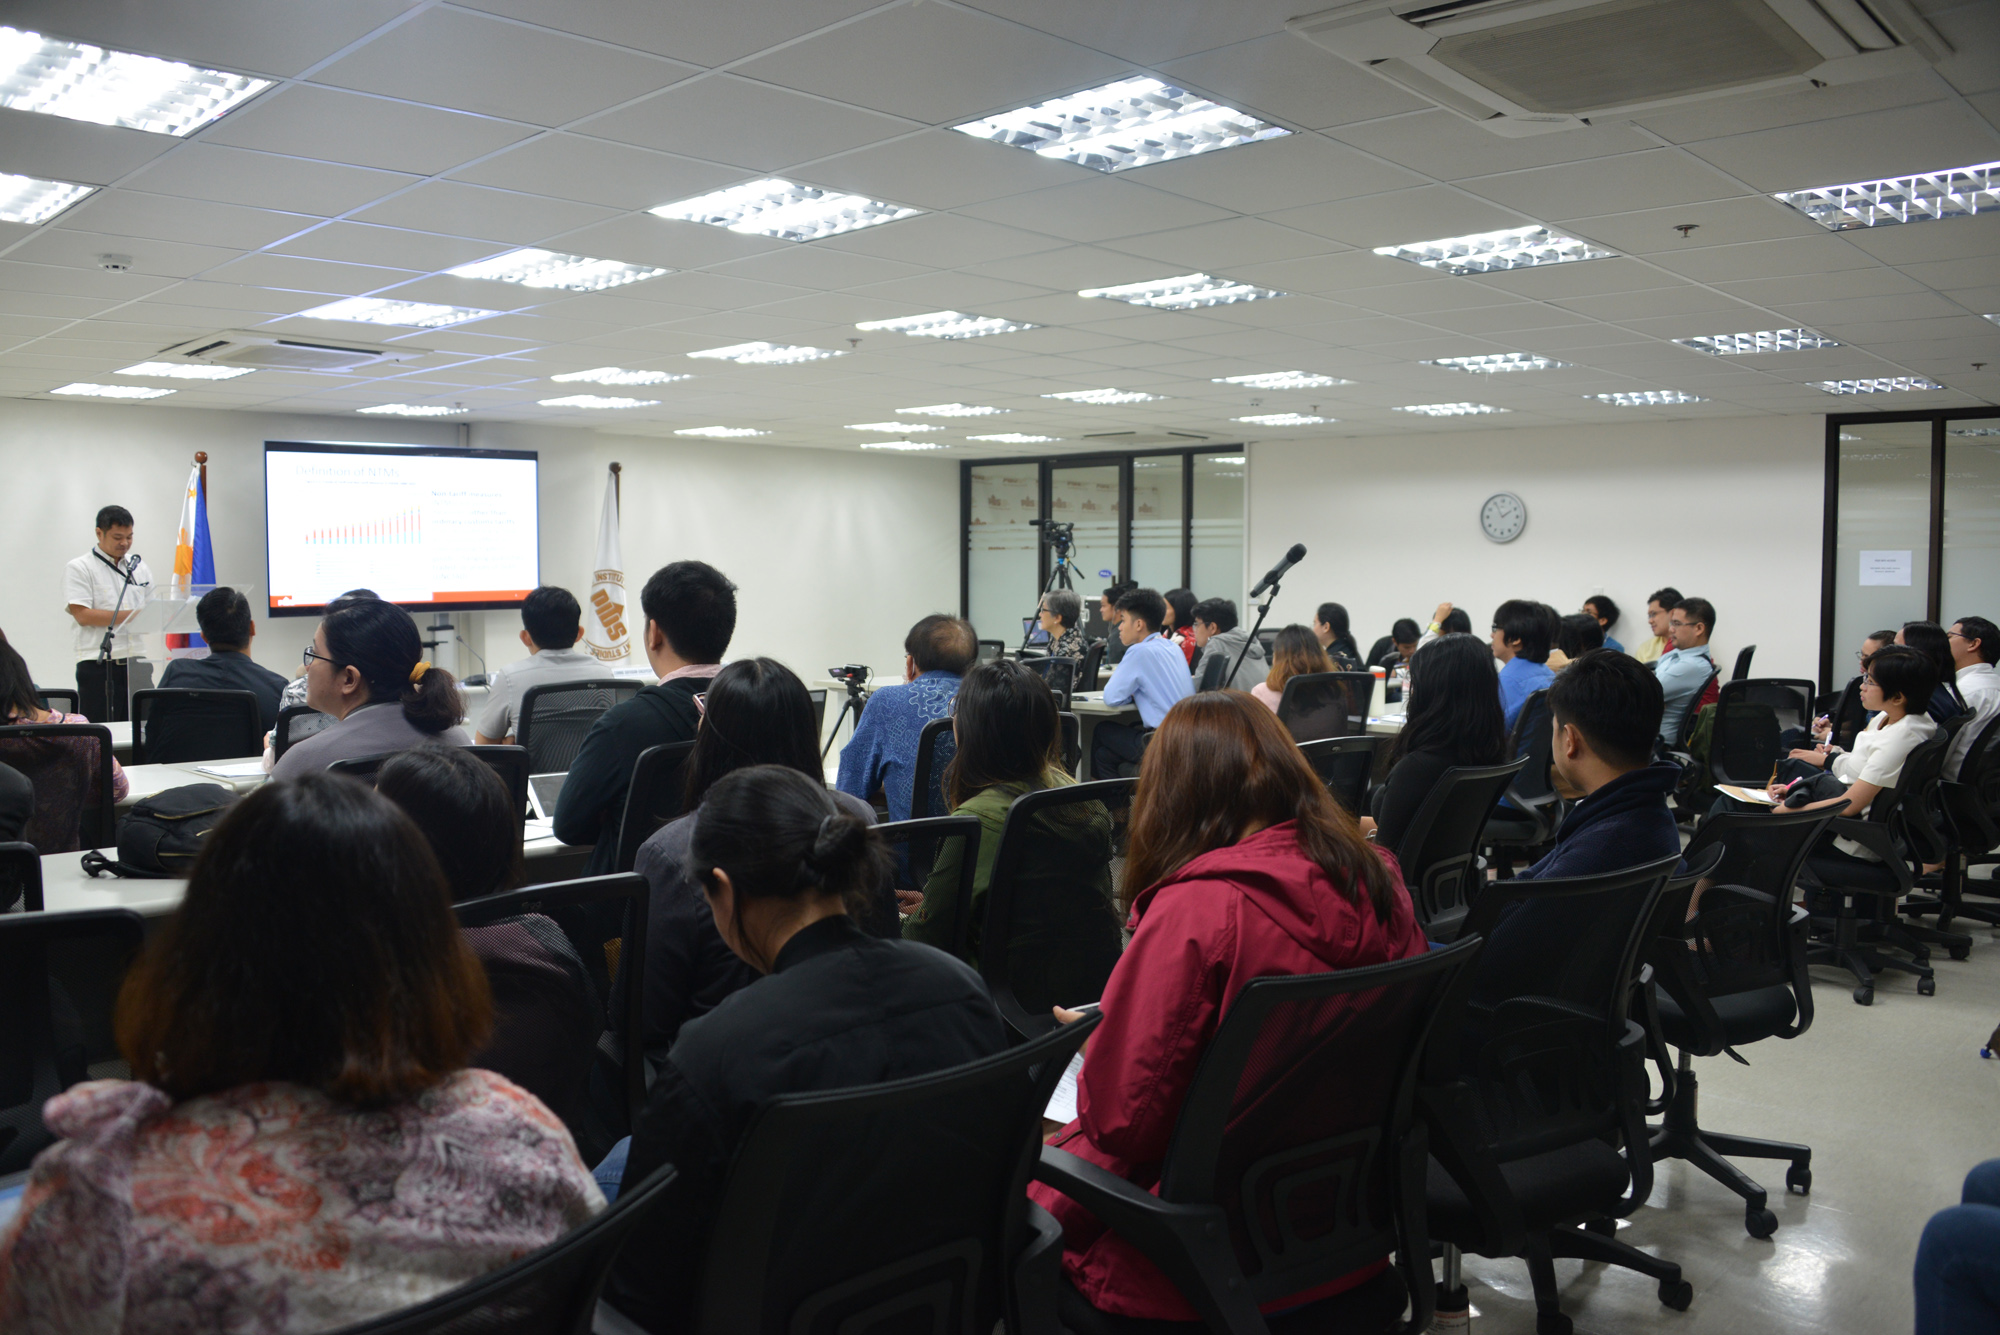 Public Seminar on Global Trade and SMEs-pids-tradesmes-7-20191016.jpg